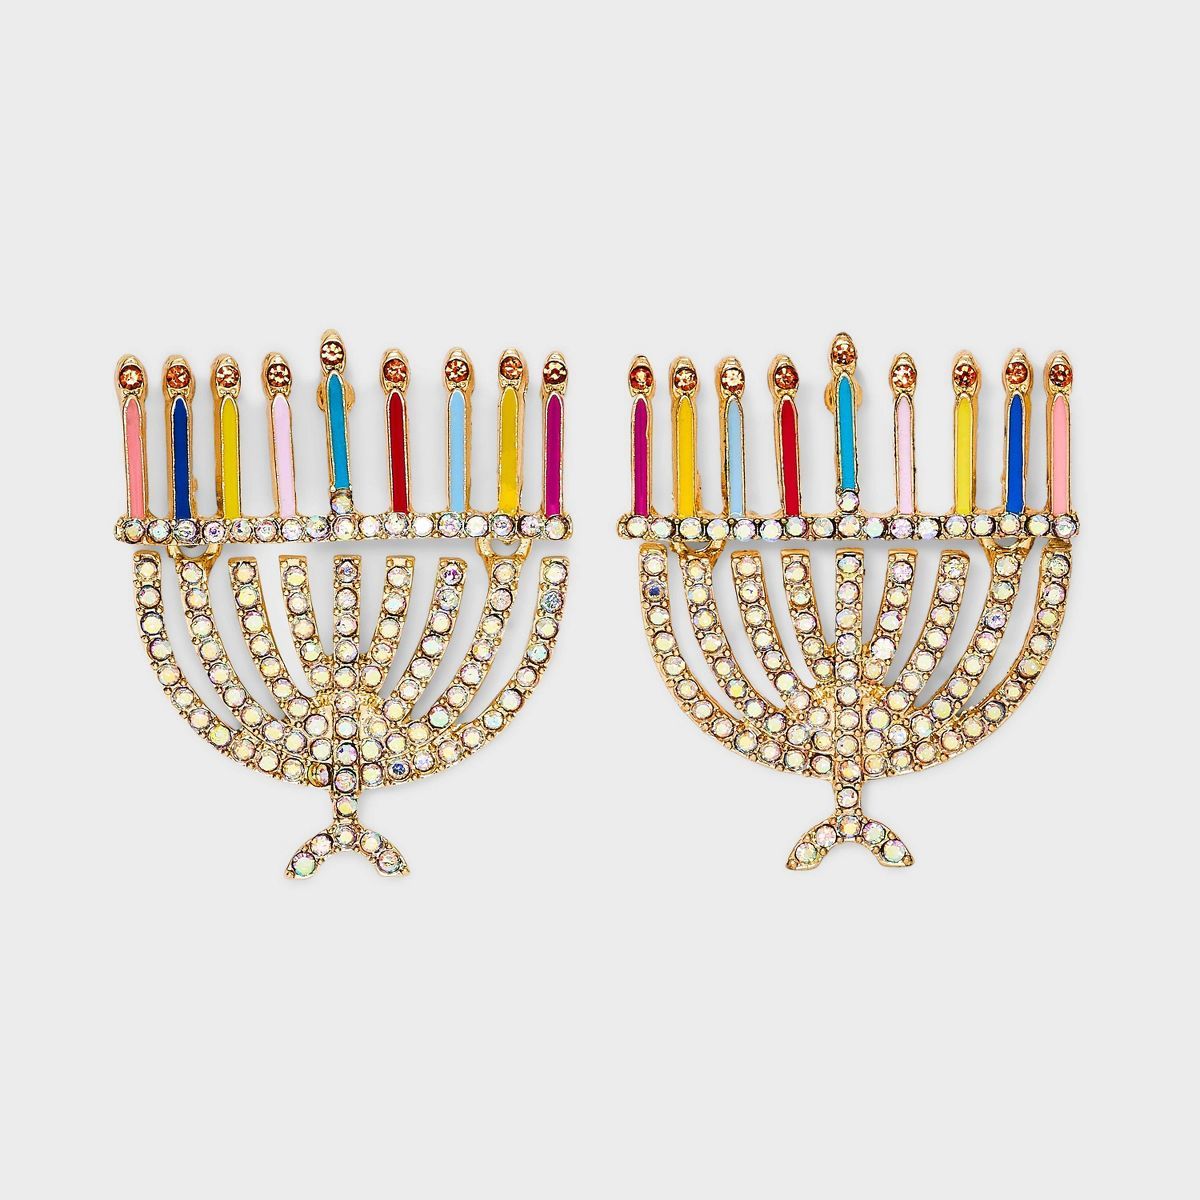 SUGARFIX by BaubleBar "Light the Candles" Stud Earrings | Target